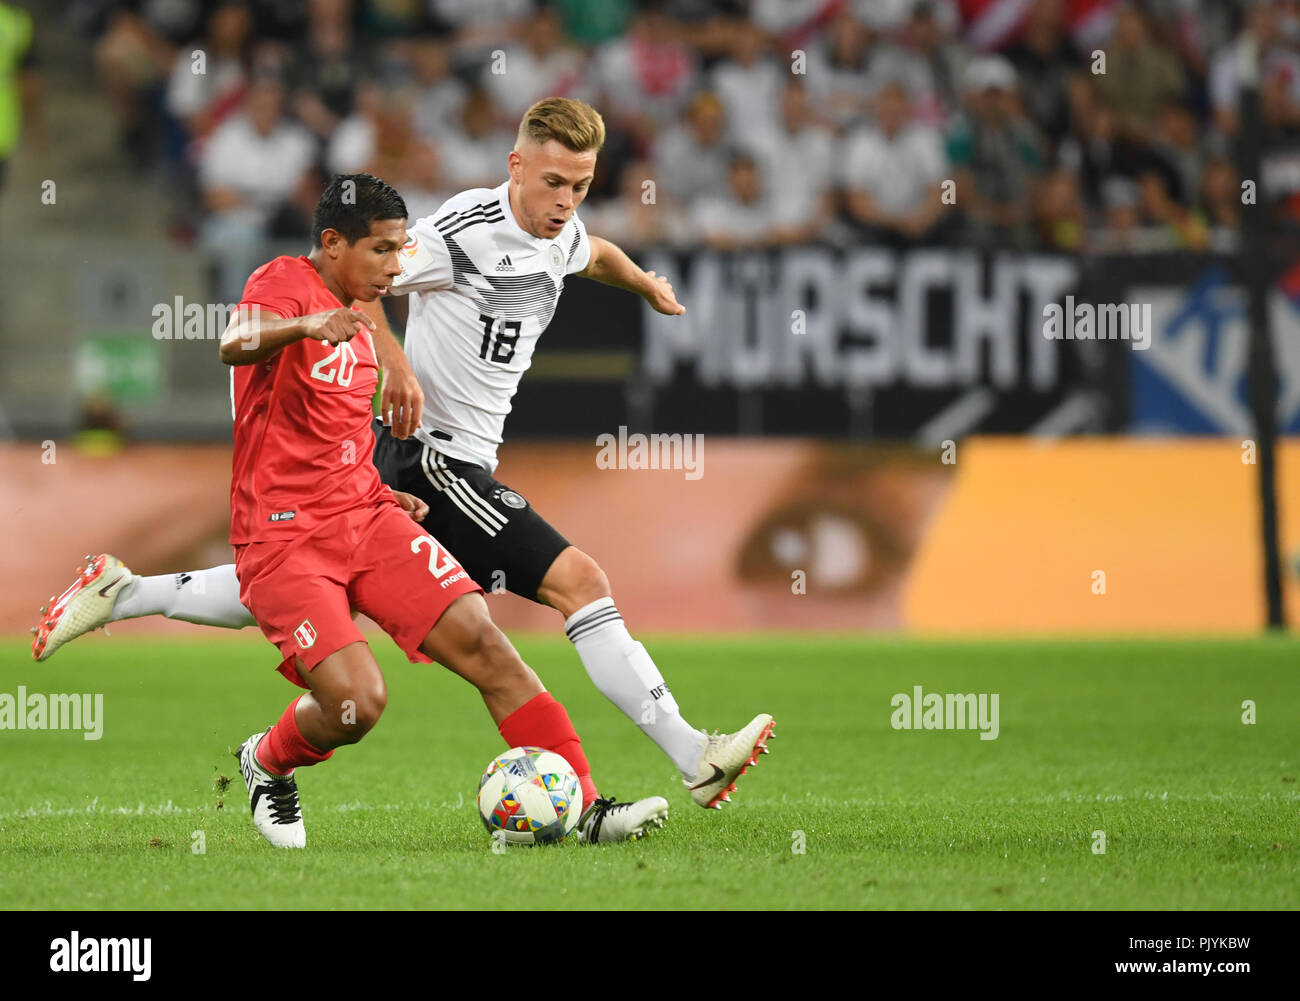 Sinsheim, Germany. 09th Sep, 2018. Soccer Friendly match: Germany vs Peru in the Wirsol Rhein-Neckar-Arena: Joshua Kimmich (R) from Germany tries to take the ball away from Edison Flores from Peru. Credit: Arne Dedert/dpa/Alamy Live News Stock Photo